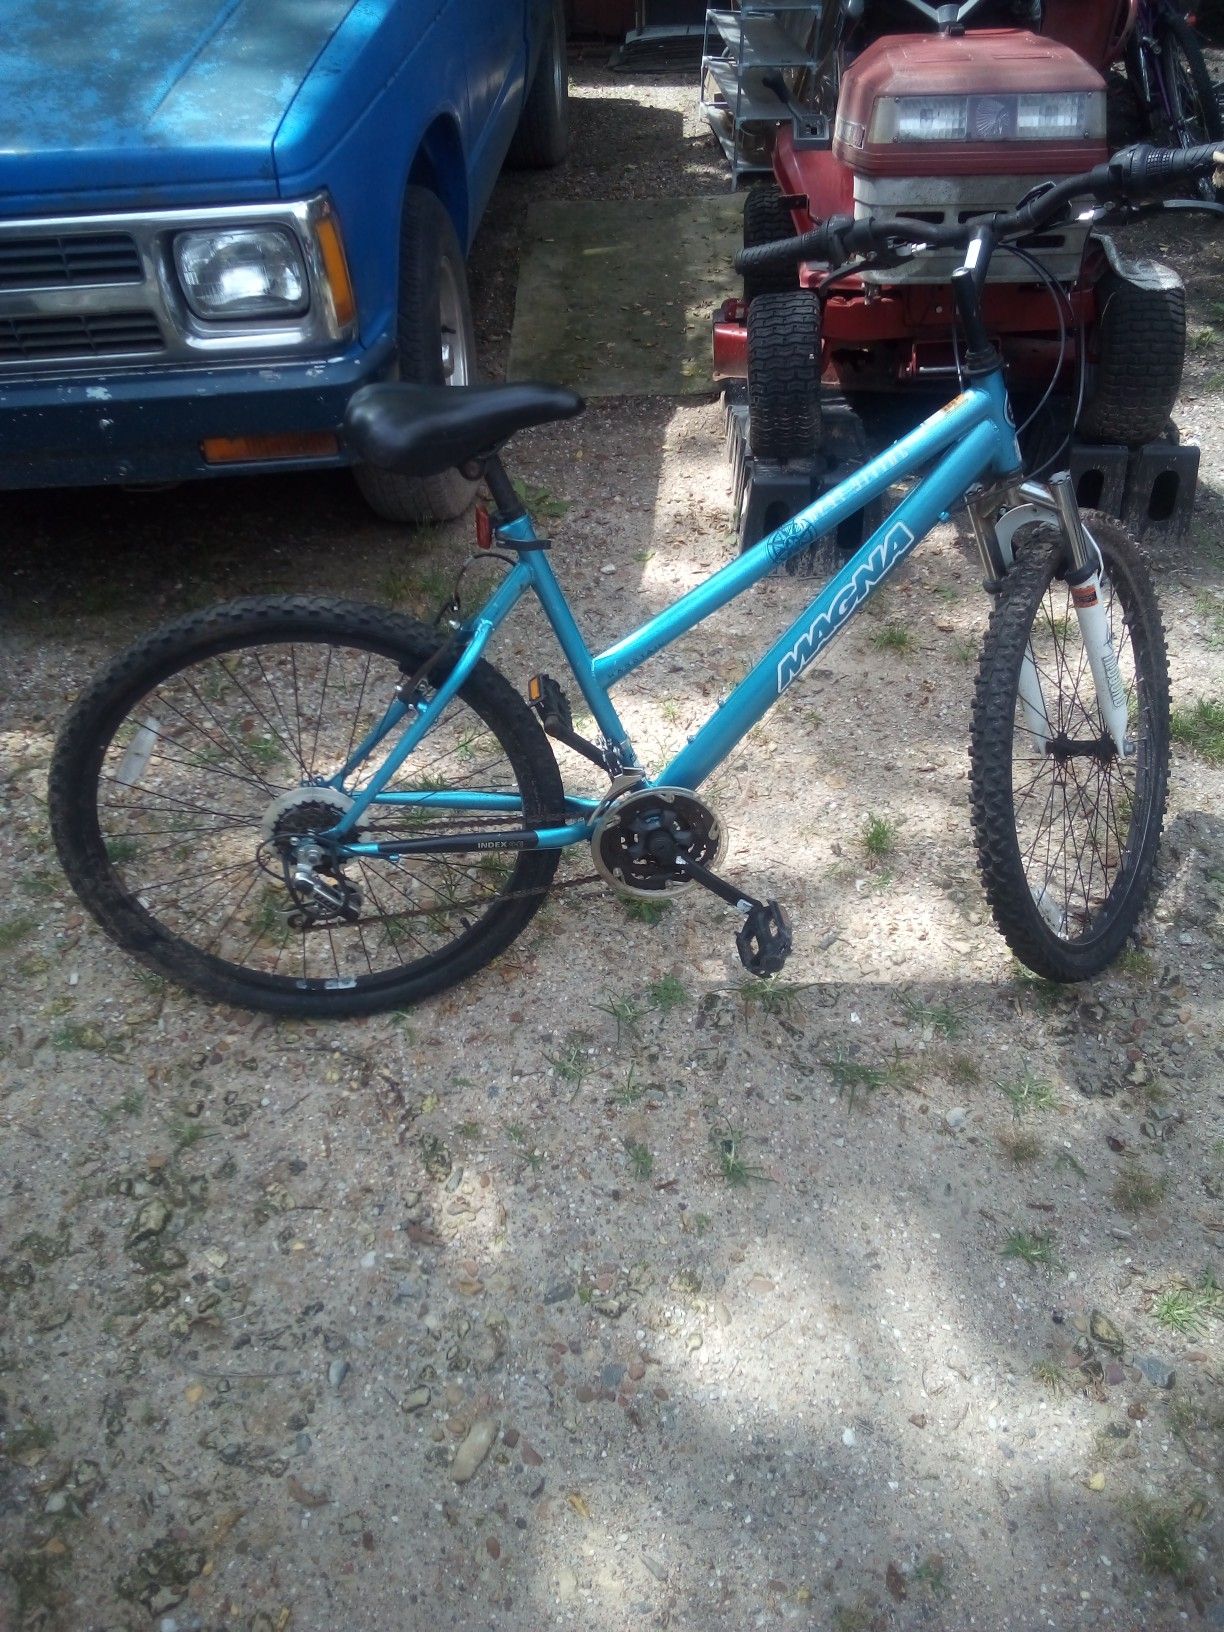 Magna 21 speed mountain bike in riding condition asking 30.00